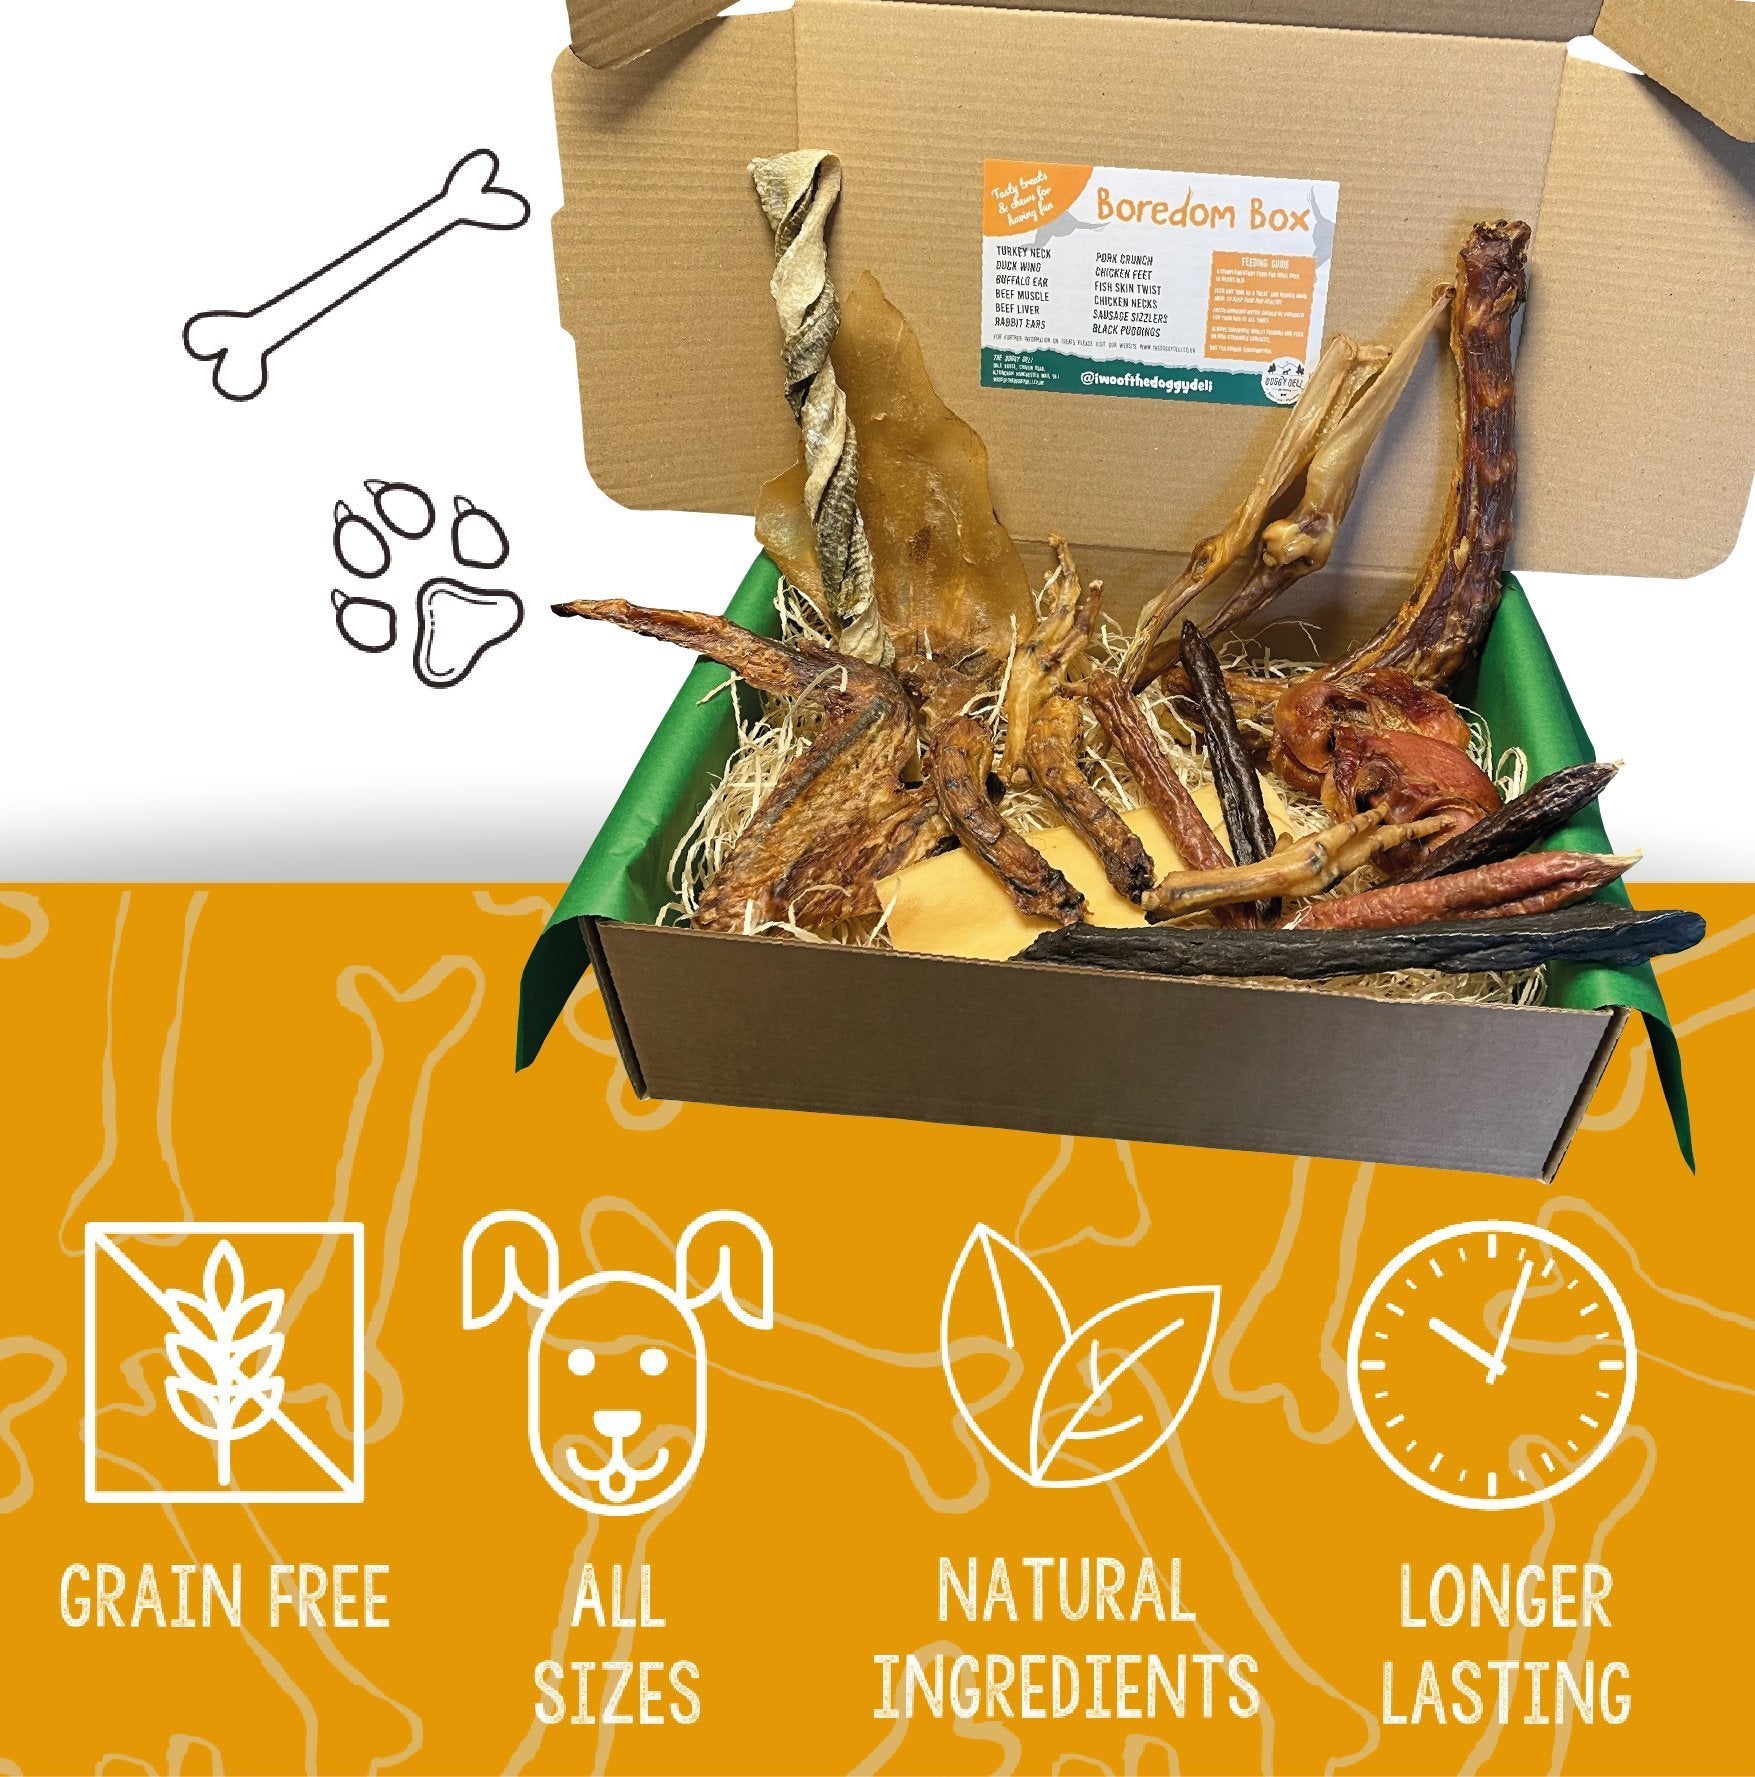 Boredom Box - Natural Treat Selection Box for All Sizes | The Doggy Deli